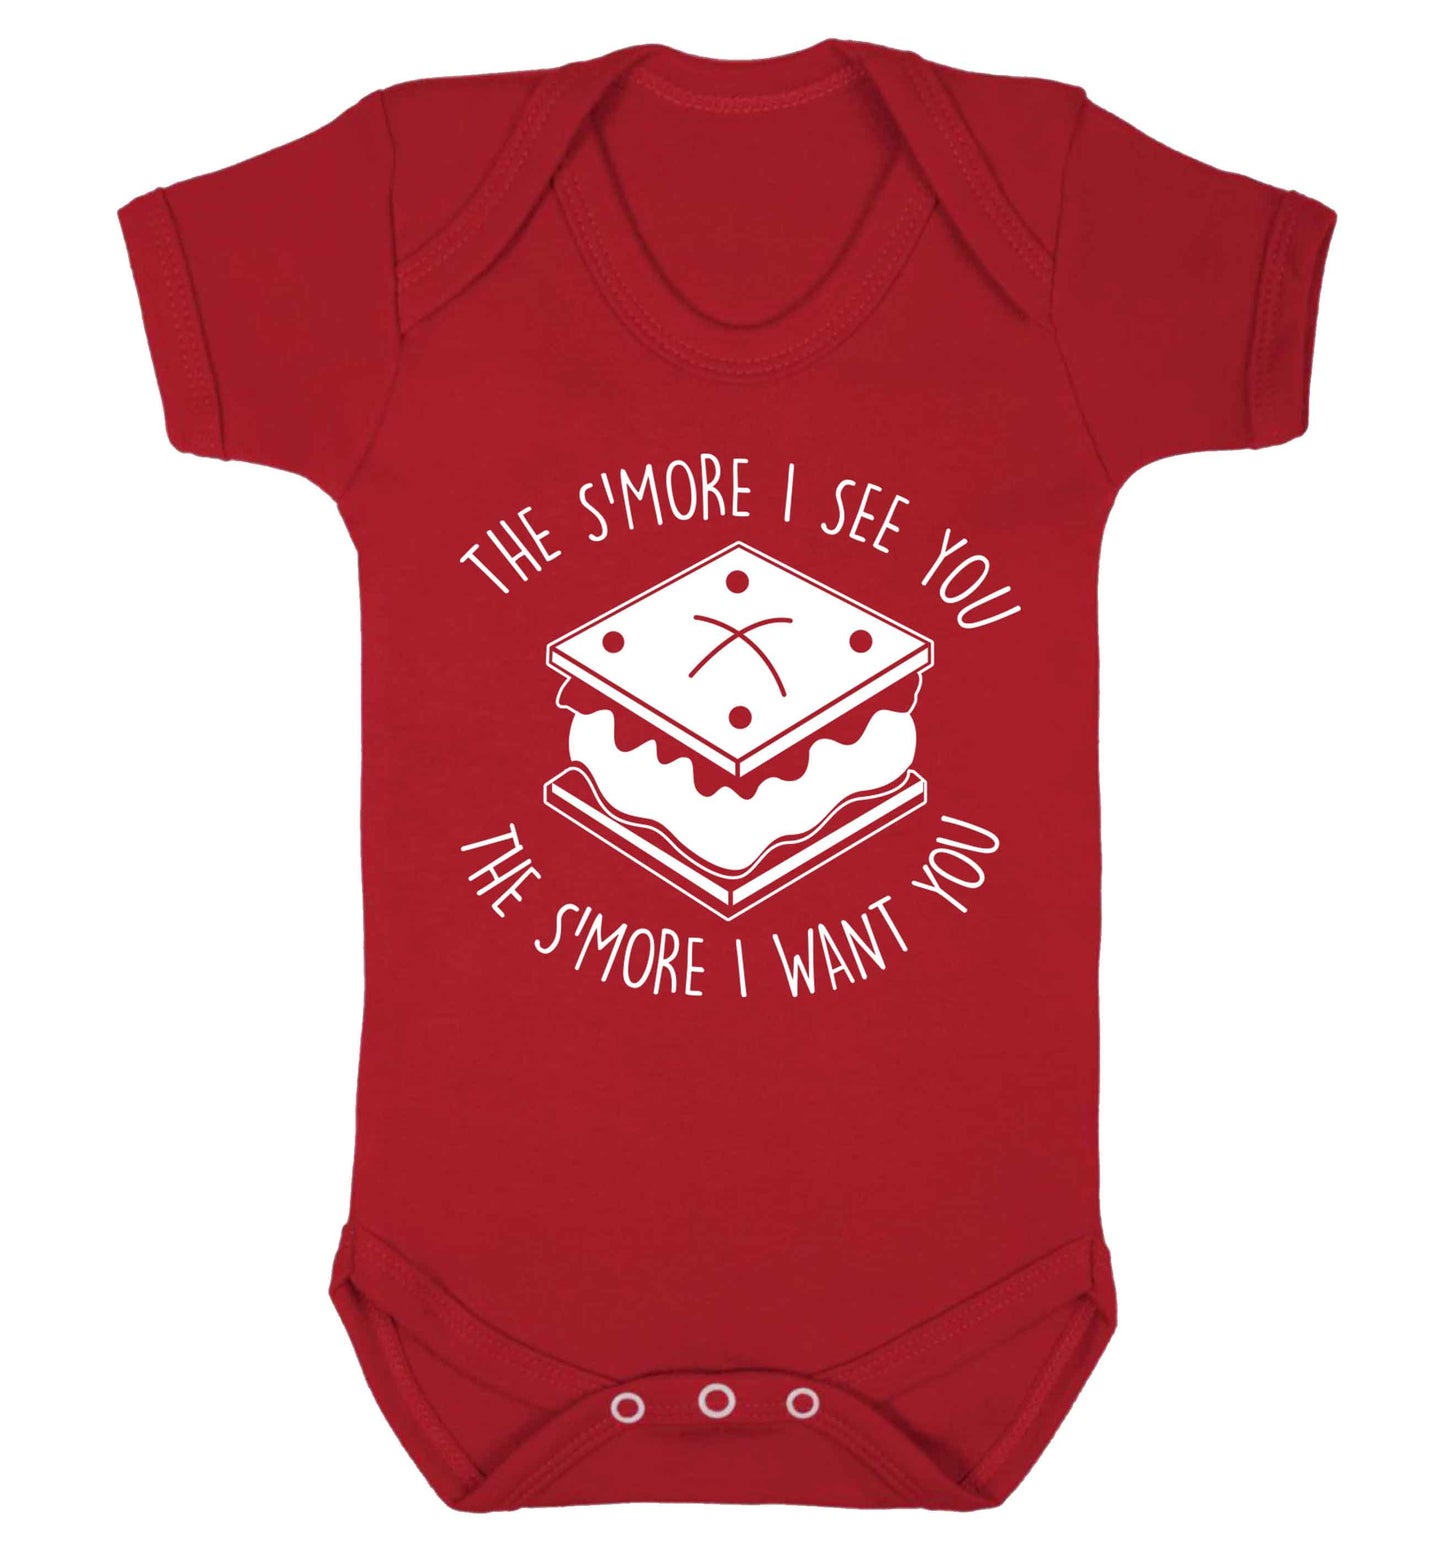 The s'more I see you the s'more I want you Baby Vest red 18-24 months